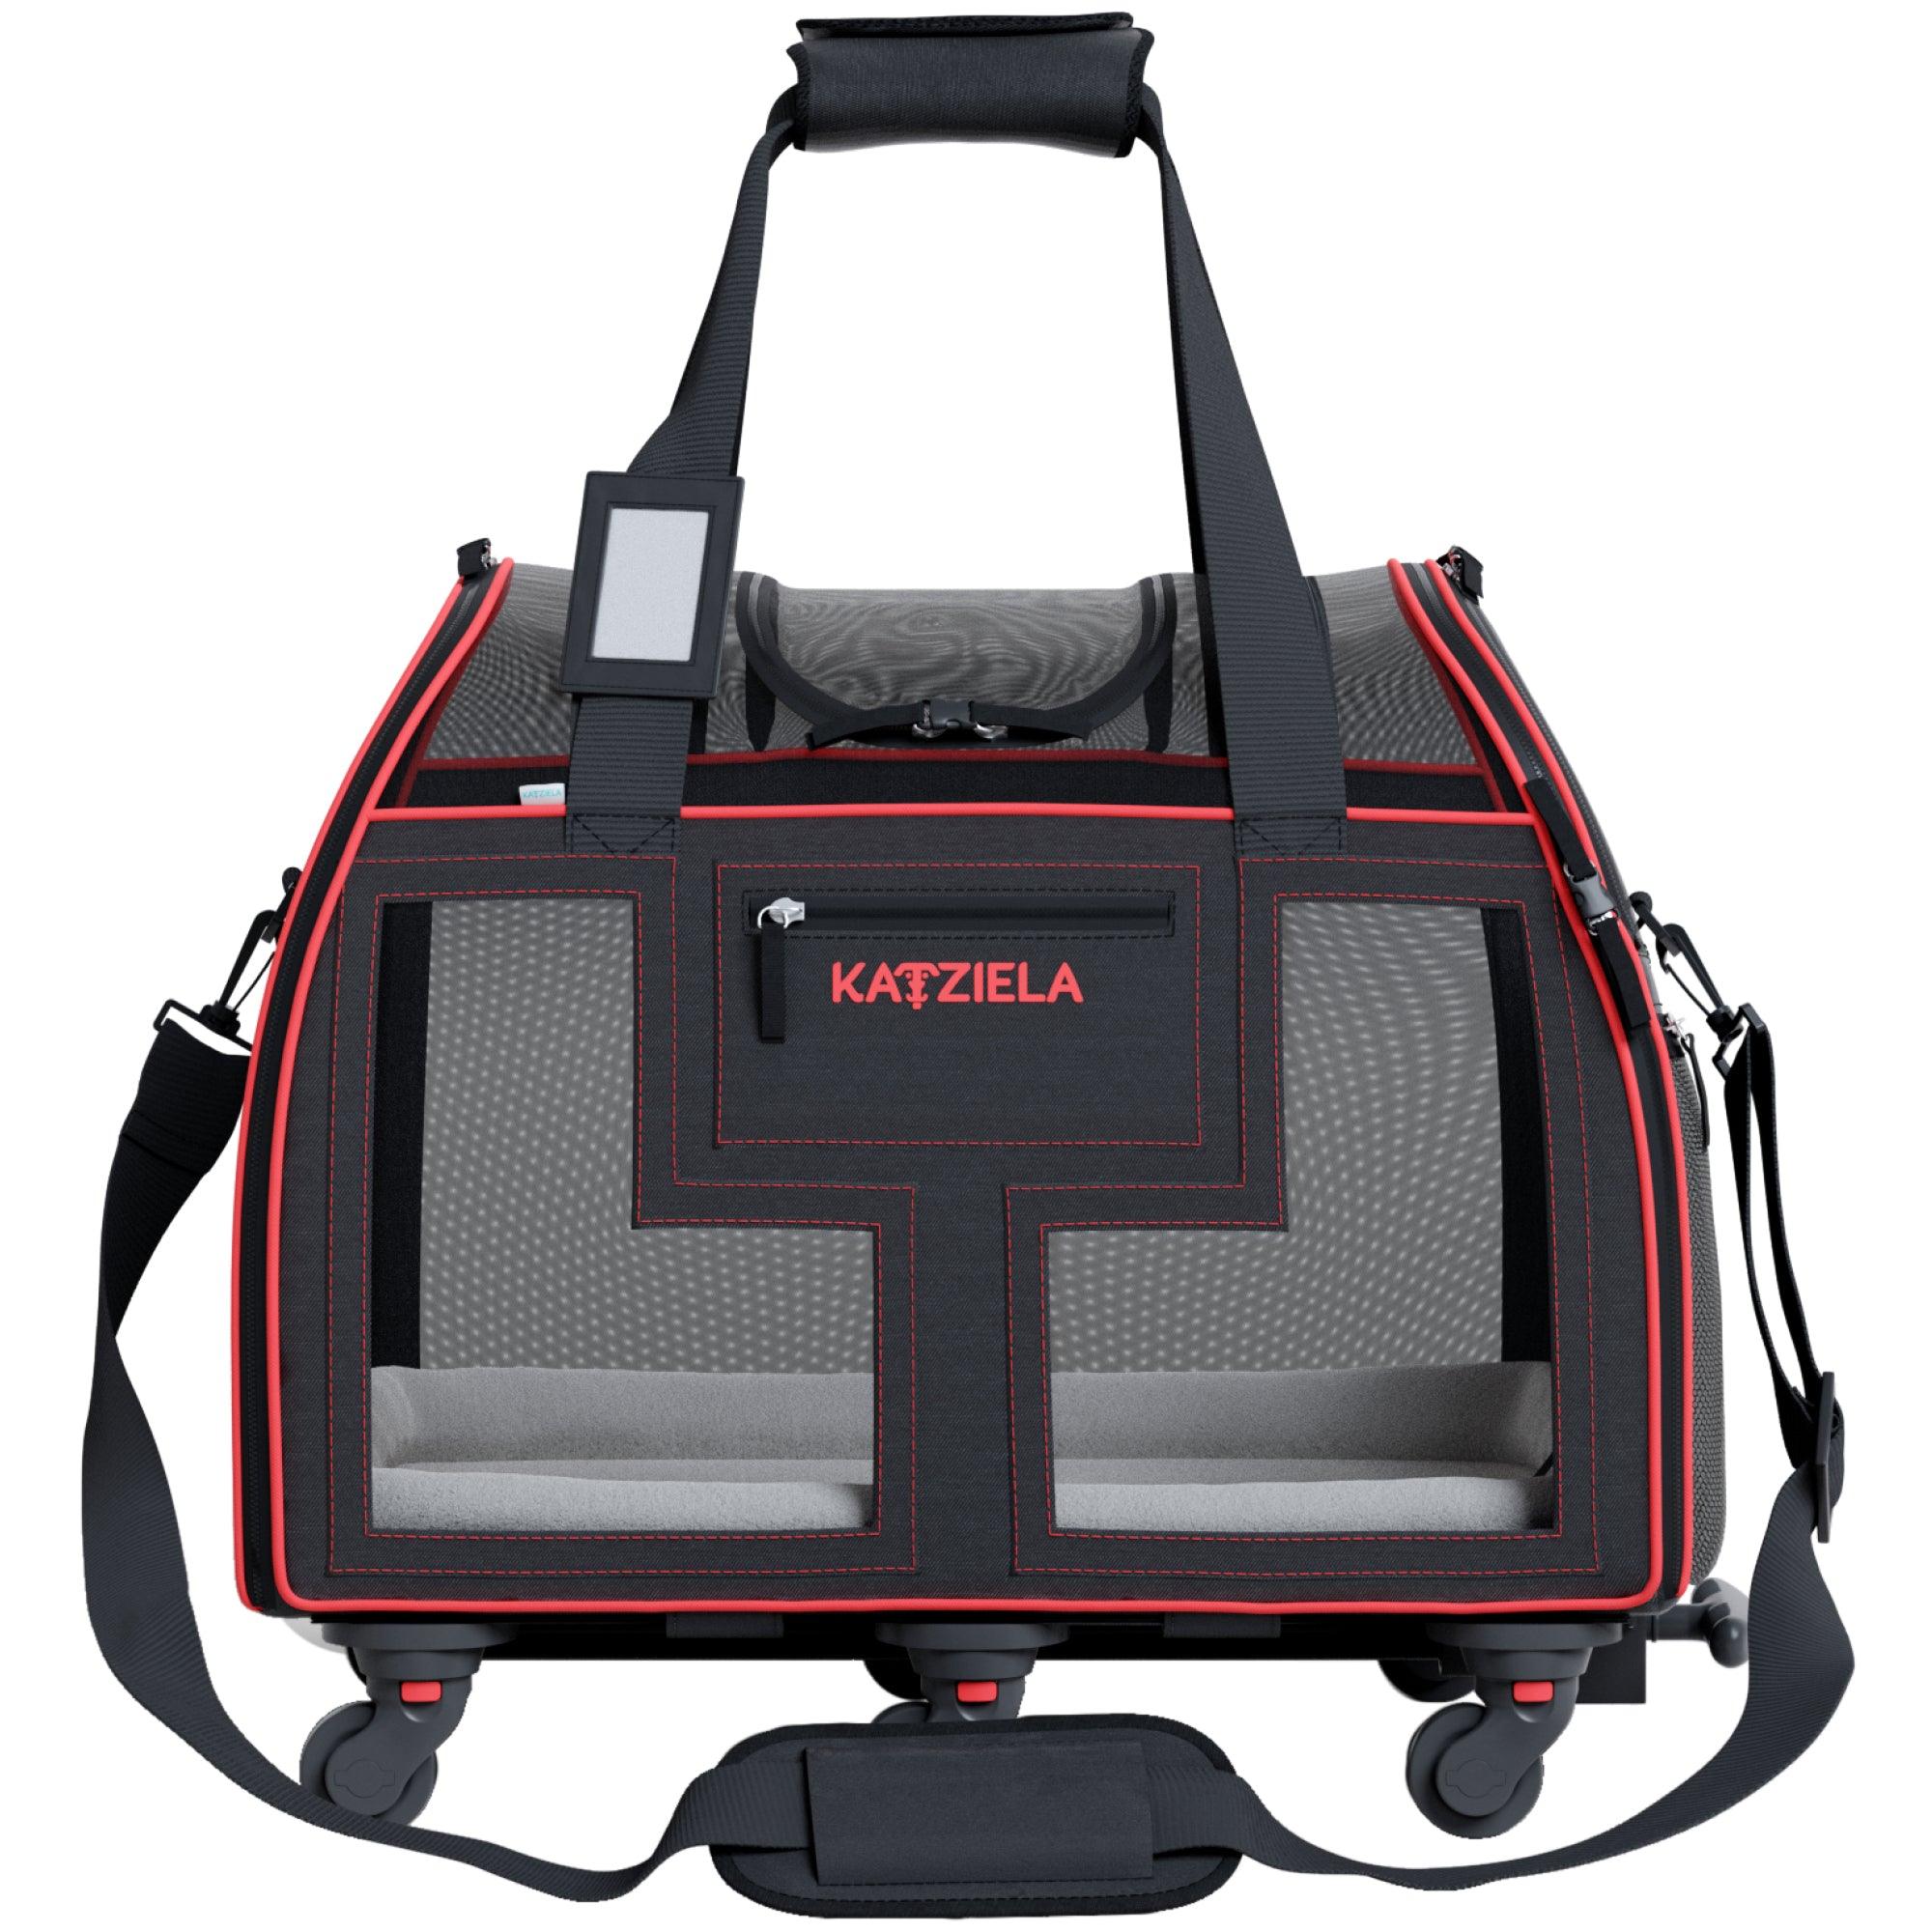 Katziela® Luxury Lorry Pet Carrier with Removable Wheels and Telescopic Handle